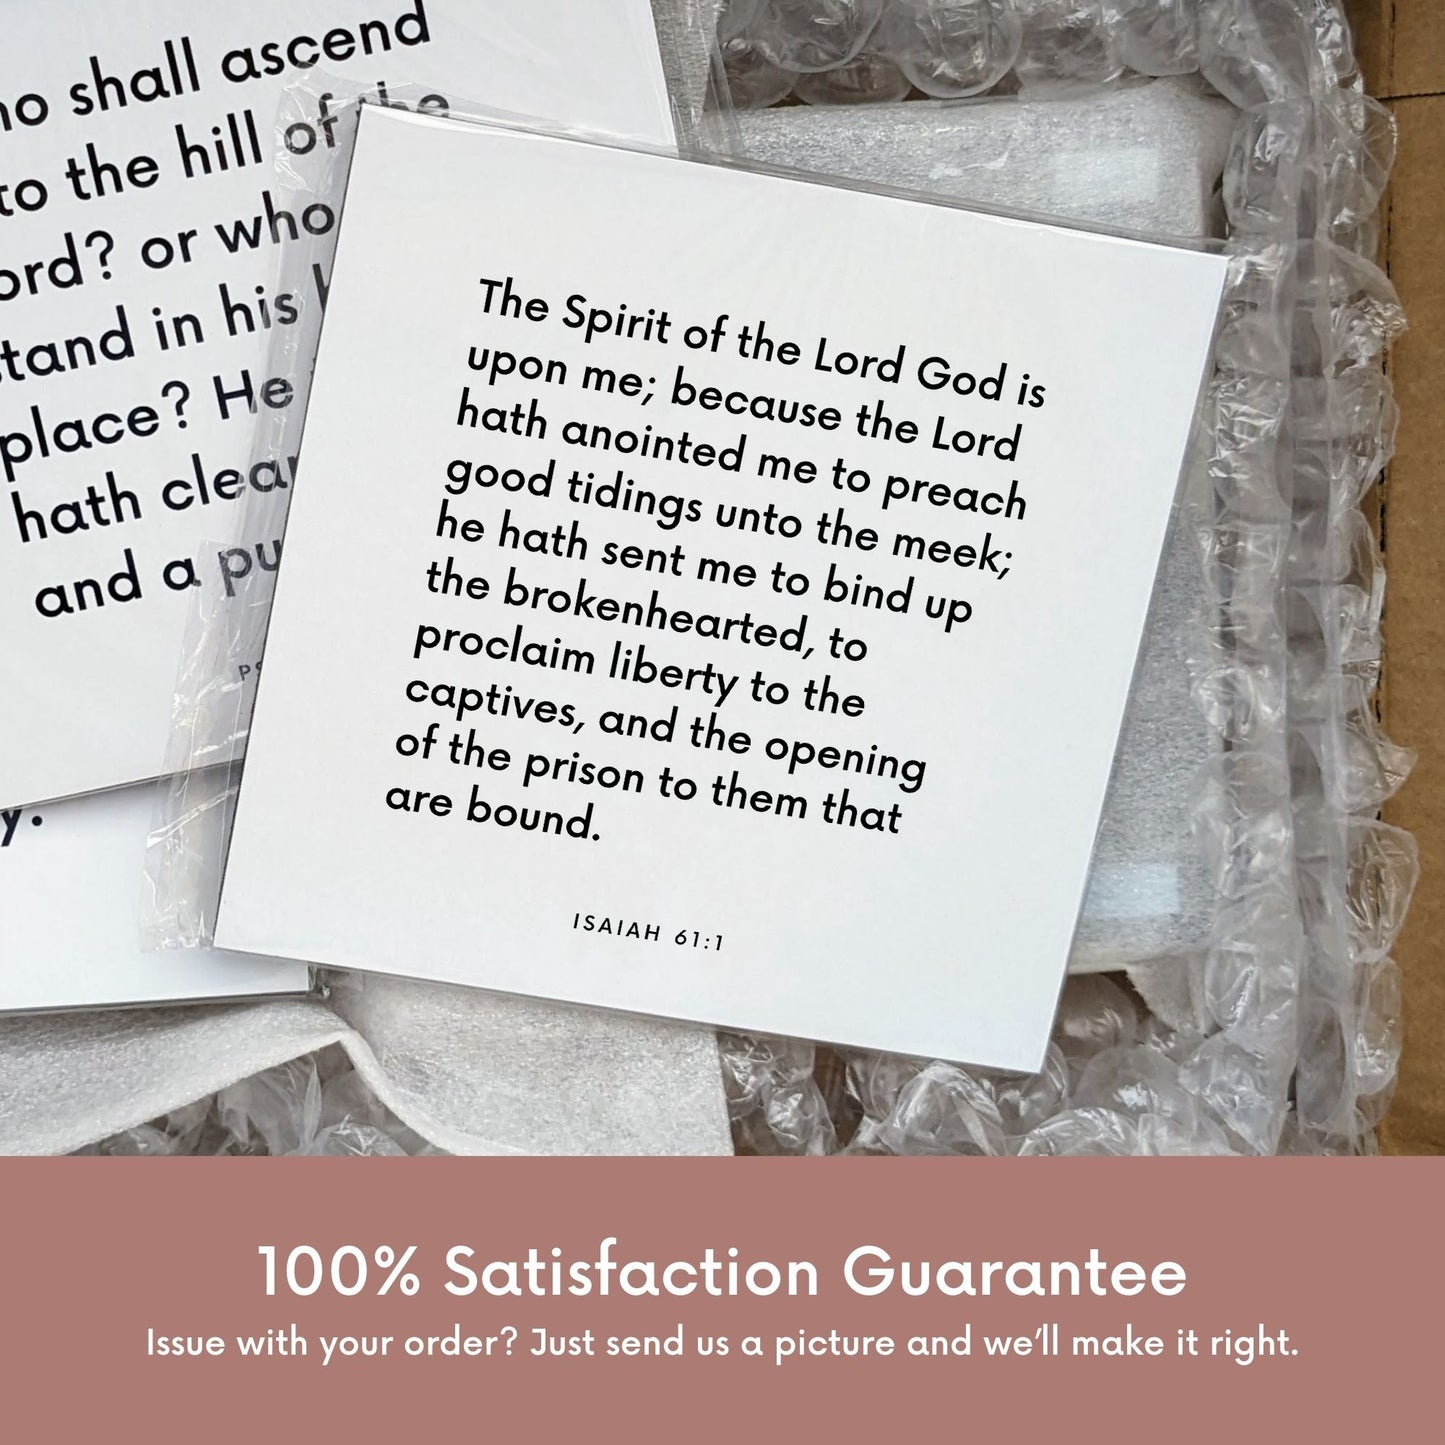 Shipping materials for scripture tile of Isaiah 61:1 - "He hath sent me to bind up the brokenhearted"